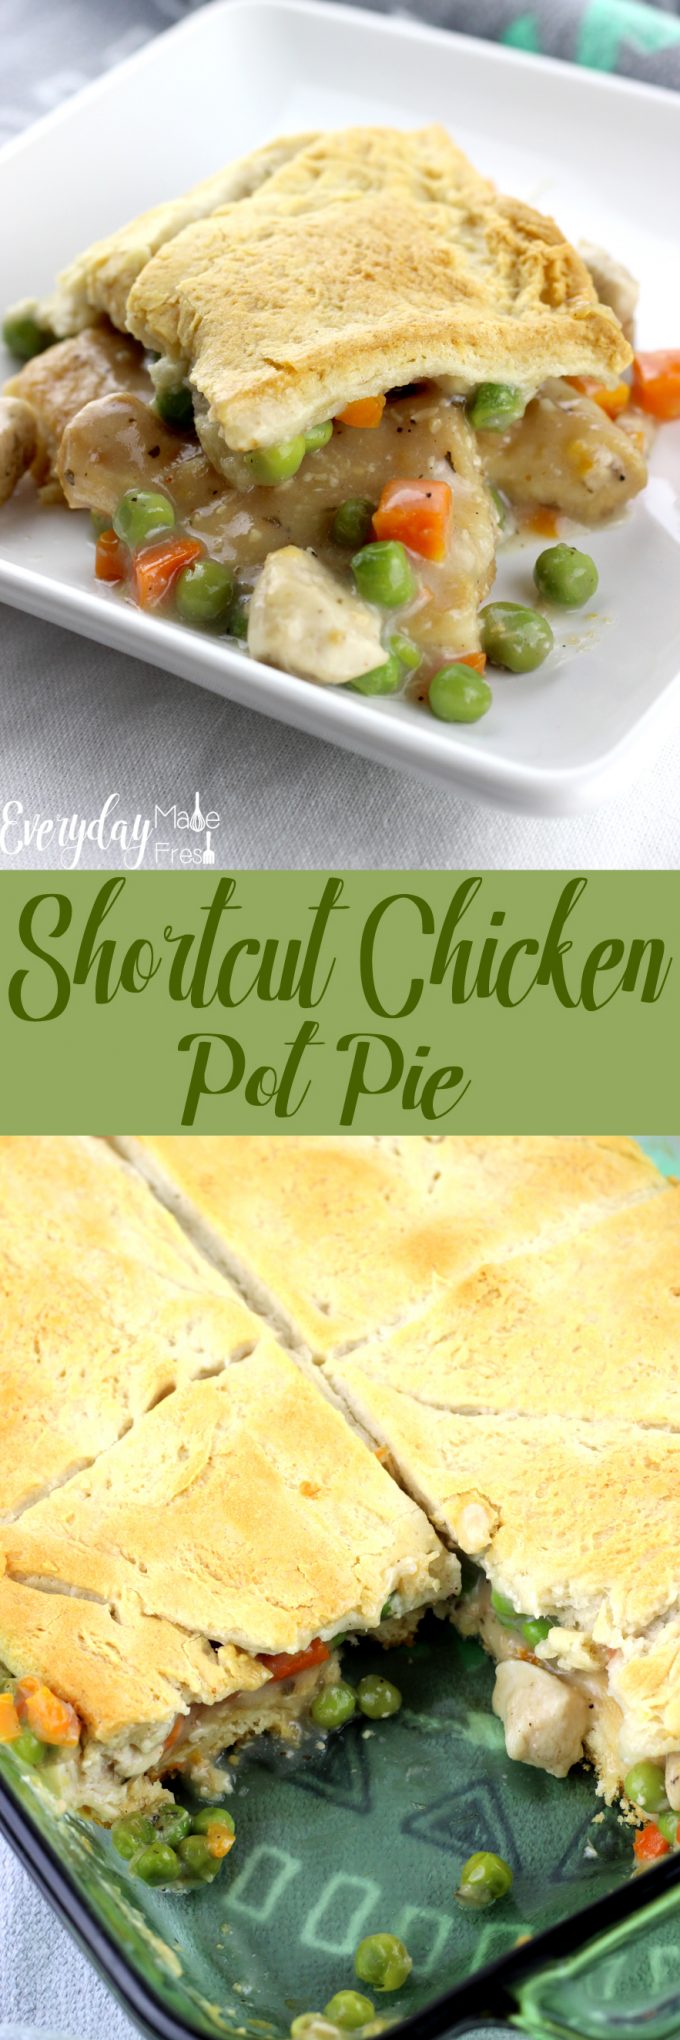 Short on time, but still want chicken pot pie? Don't buy frozen when you can make this Shortcut Chicken Pot Pie! | EverydayMadeFresh.com